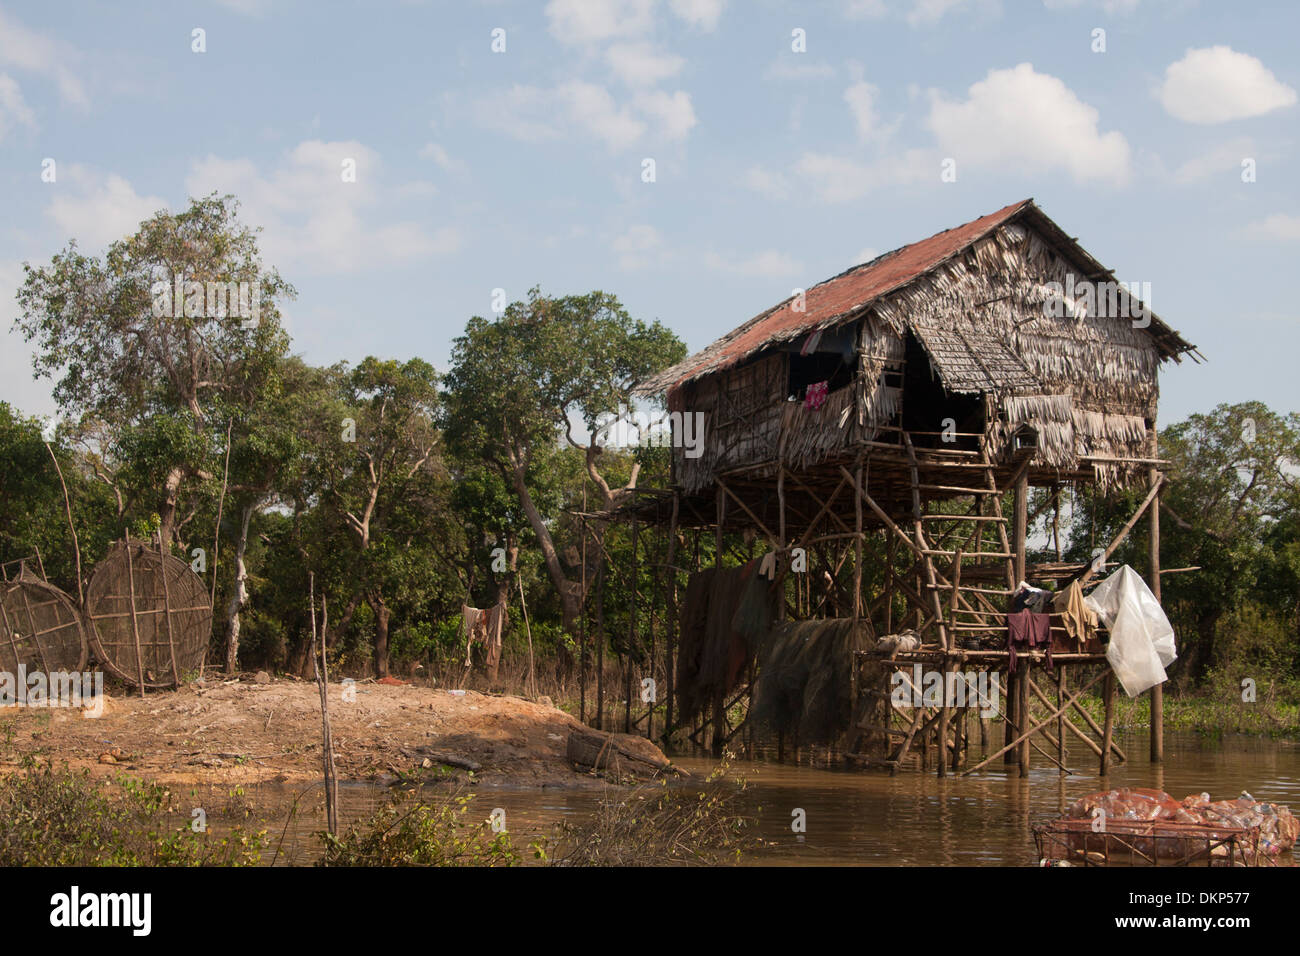 A boat in Kampong Phluk, Floating Village in Cambodia. Stock Photo